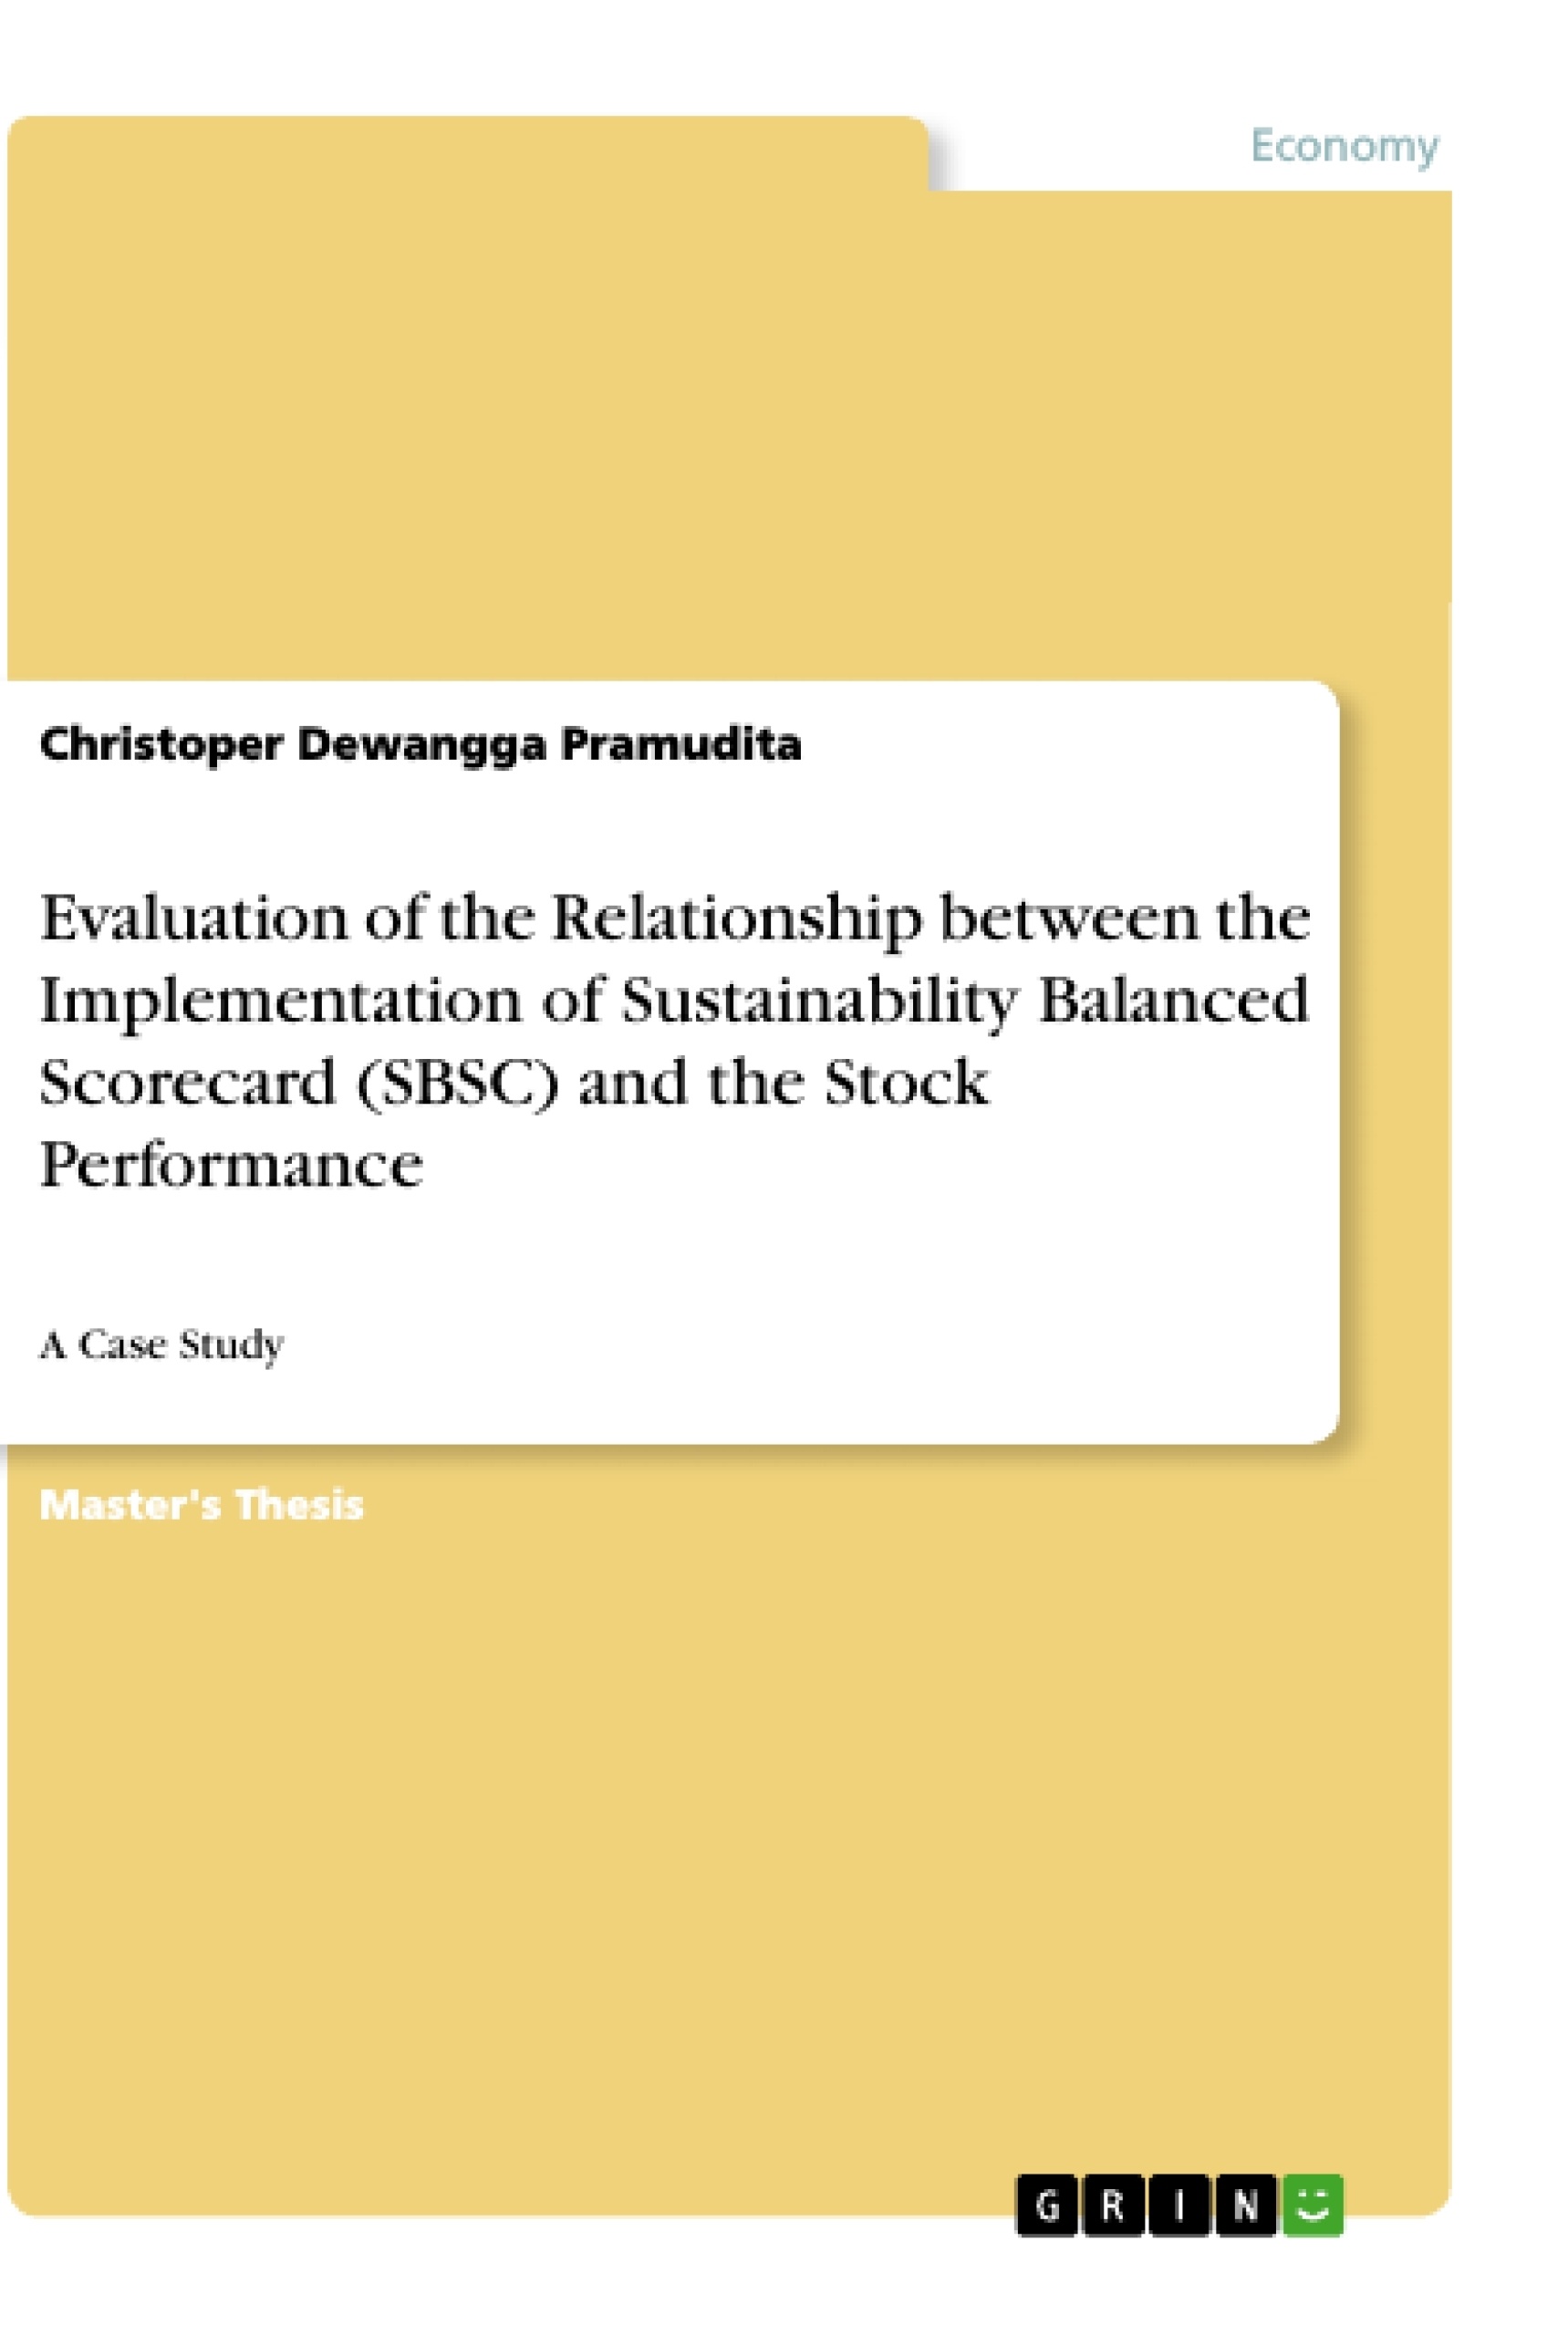 Title: Evaluation of the Relationship between the Implementation of Sustainability Balanced Scorecard (SBSC) and the Stock Performance